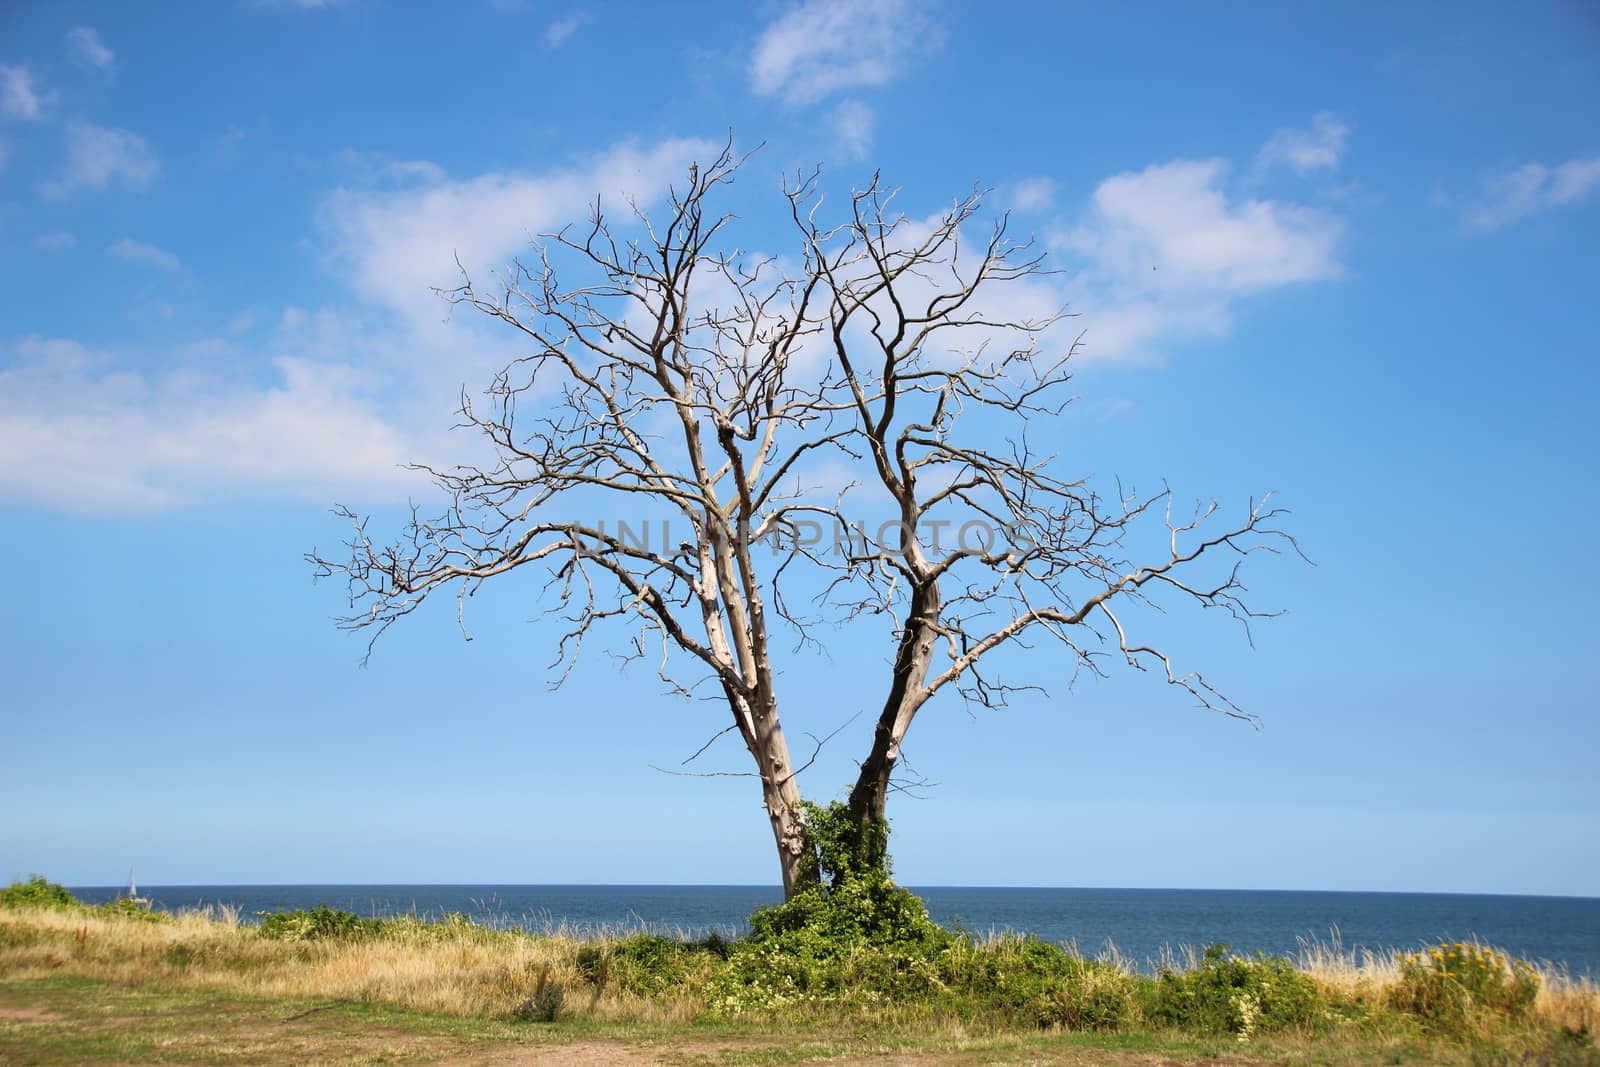 Dead tree at ocean front with horizon background